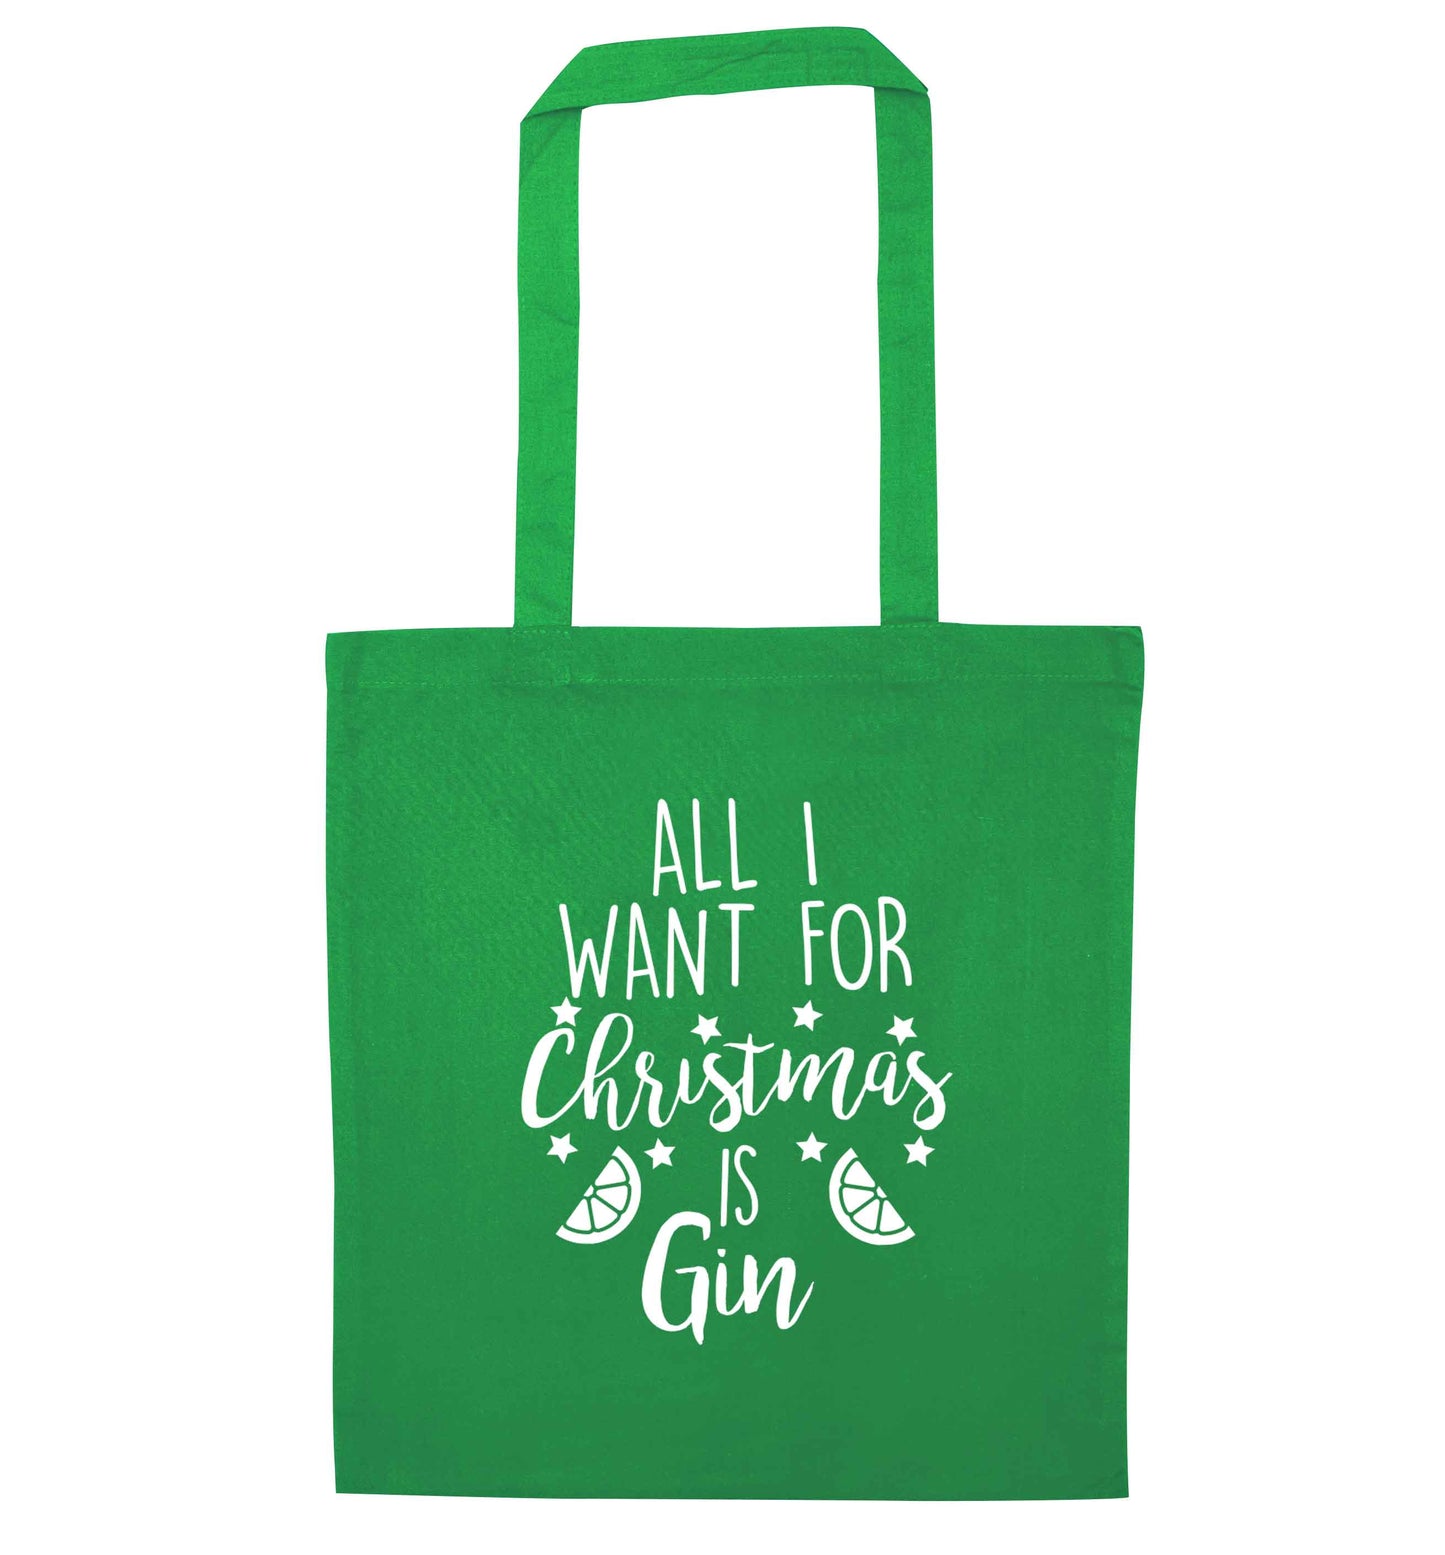 All I want for Christmas is gin green tote bag